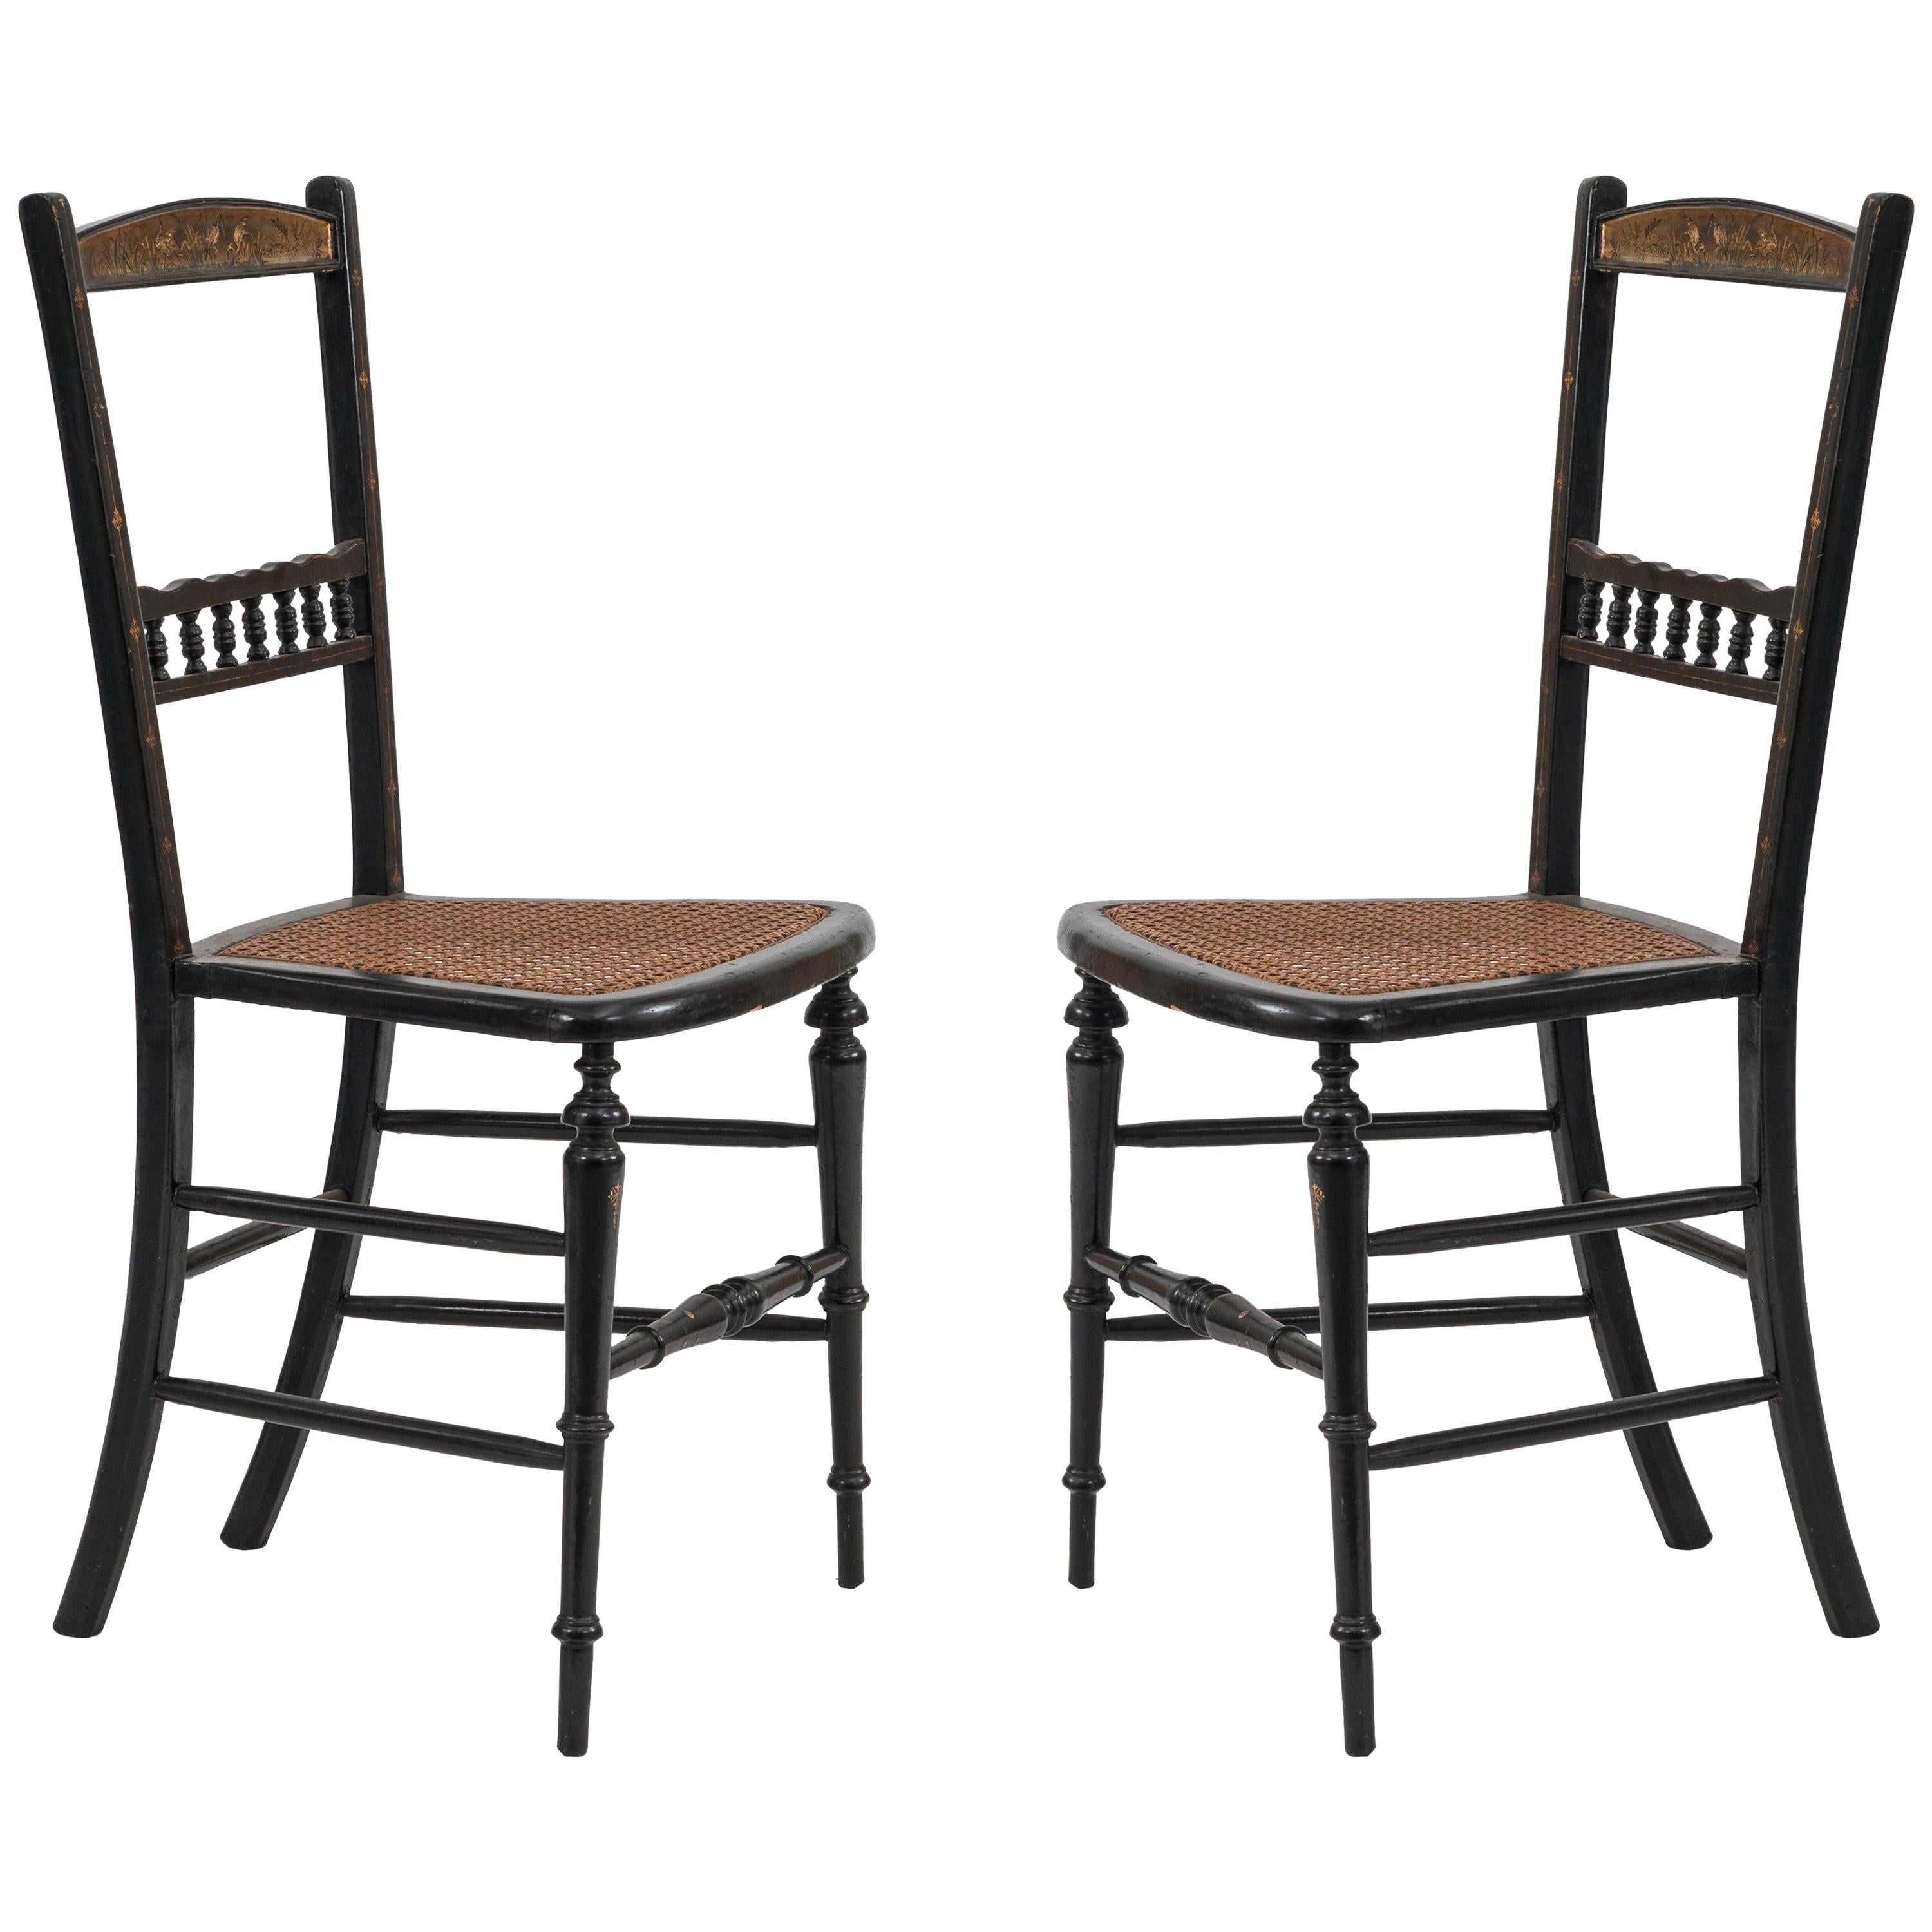 Pair of English Victorian Lacquered Side Chairs